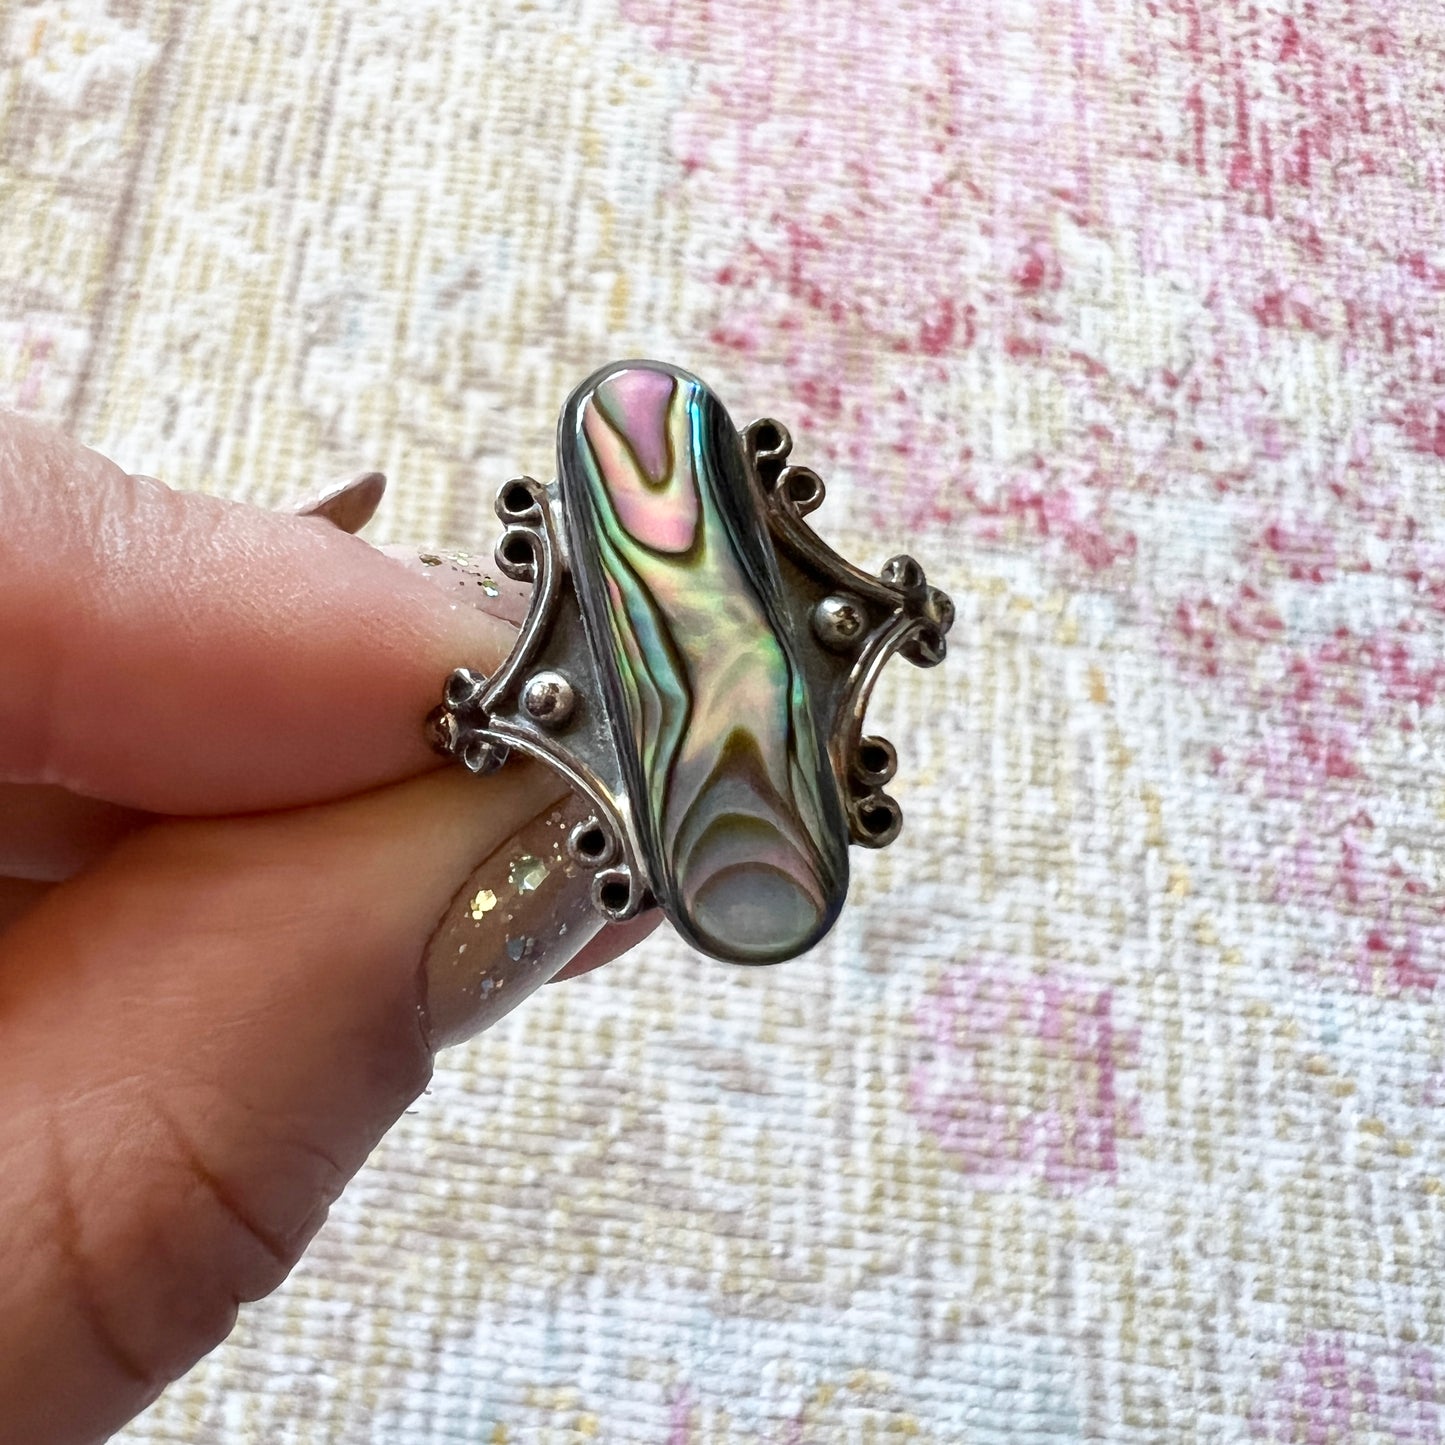 [AS-IS] 1970s Style Abalone & Sterling Silver Ring | size 8